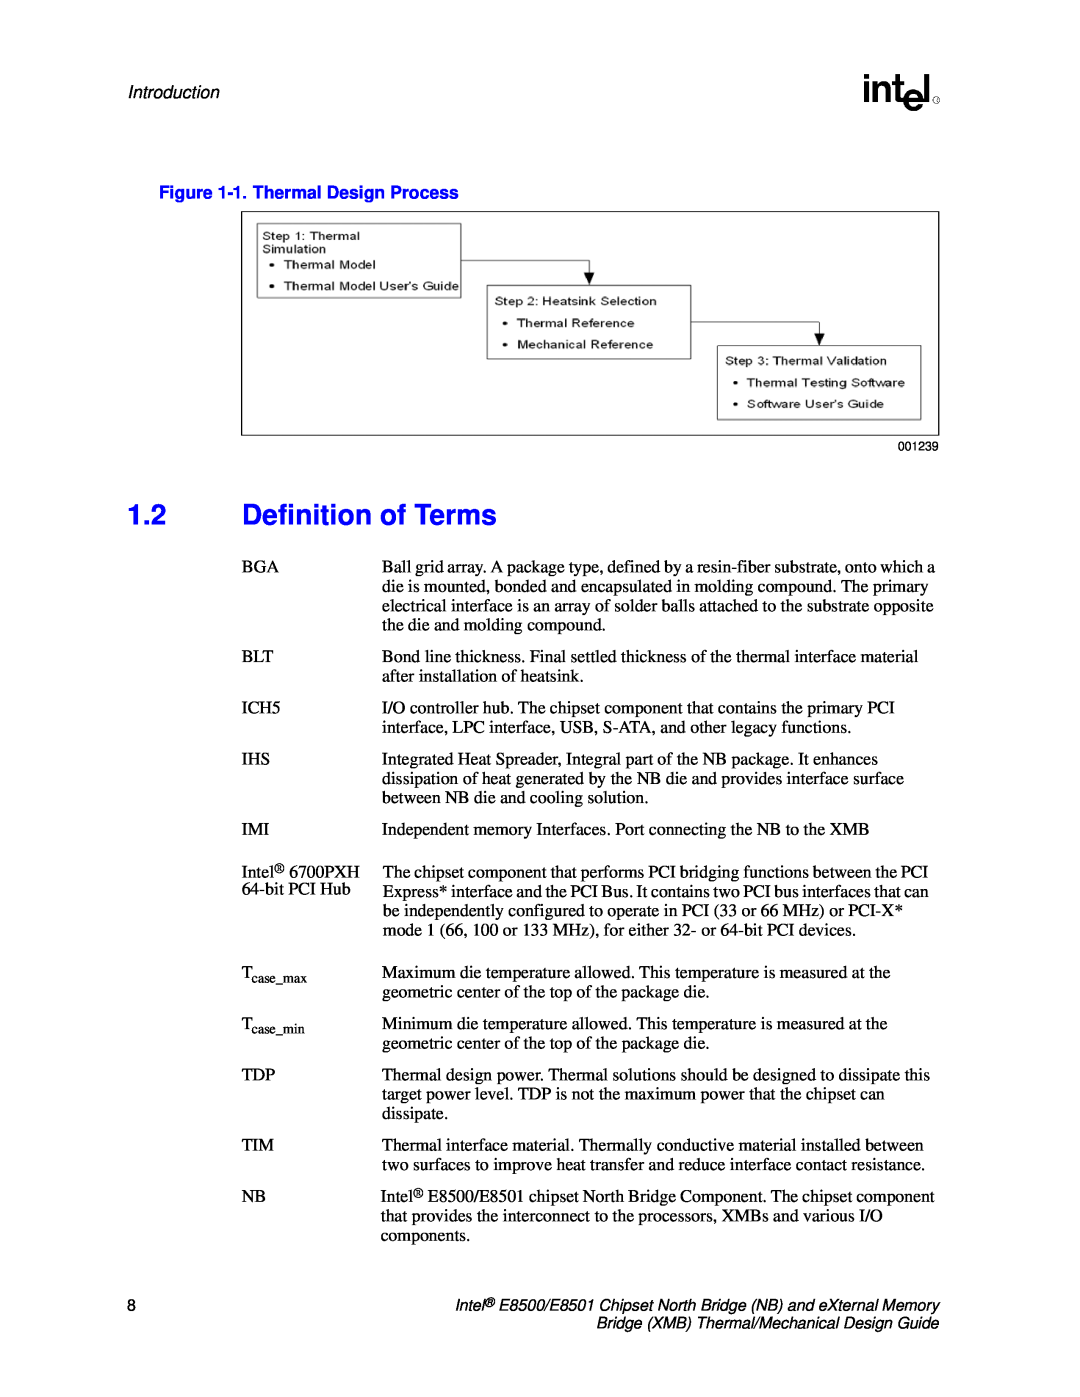 Intel E8501 manual 1.2Definition of Terms, Introduction, 1.Thermal Design Process 